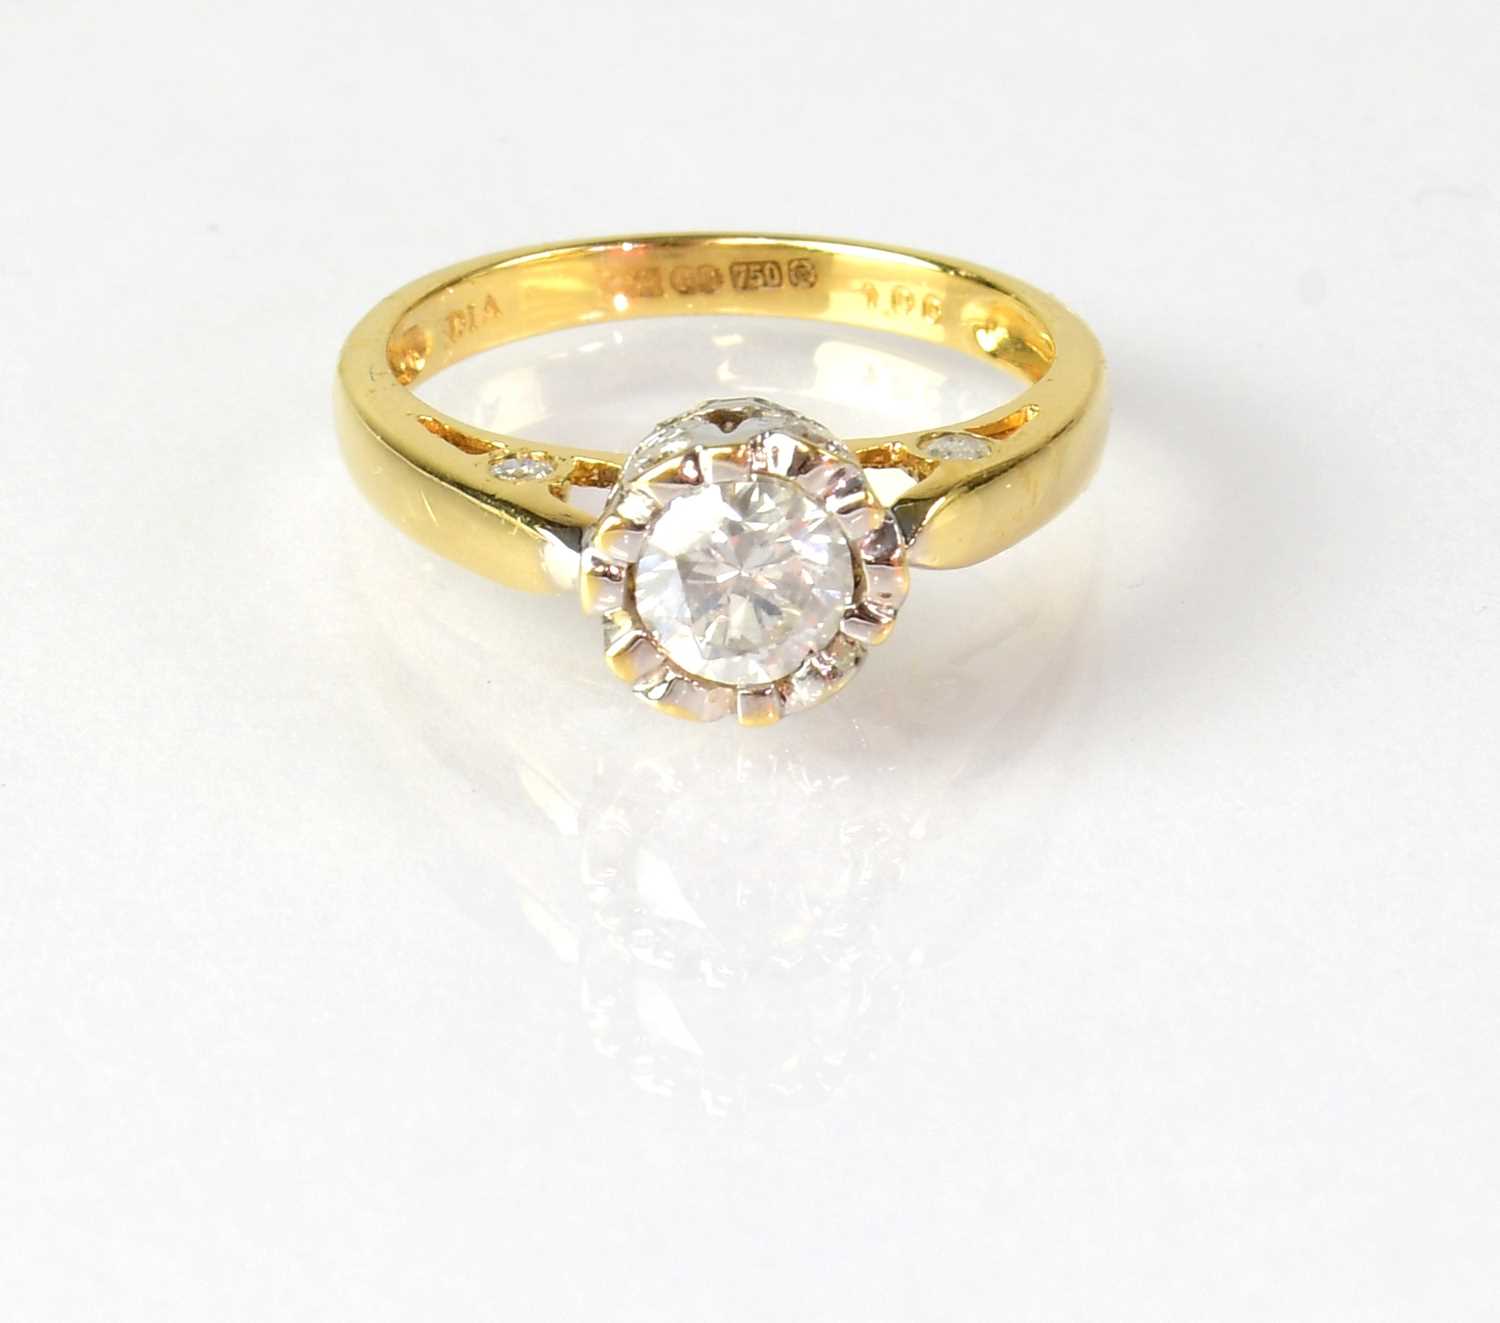 An 18ct yellow gold solitaire diamond ring, the stone in an unusual setting, set with smaller